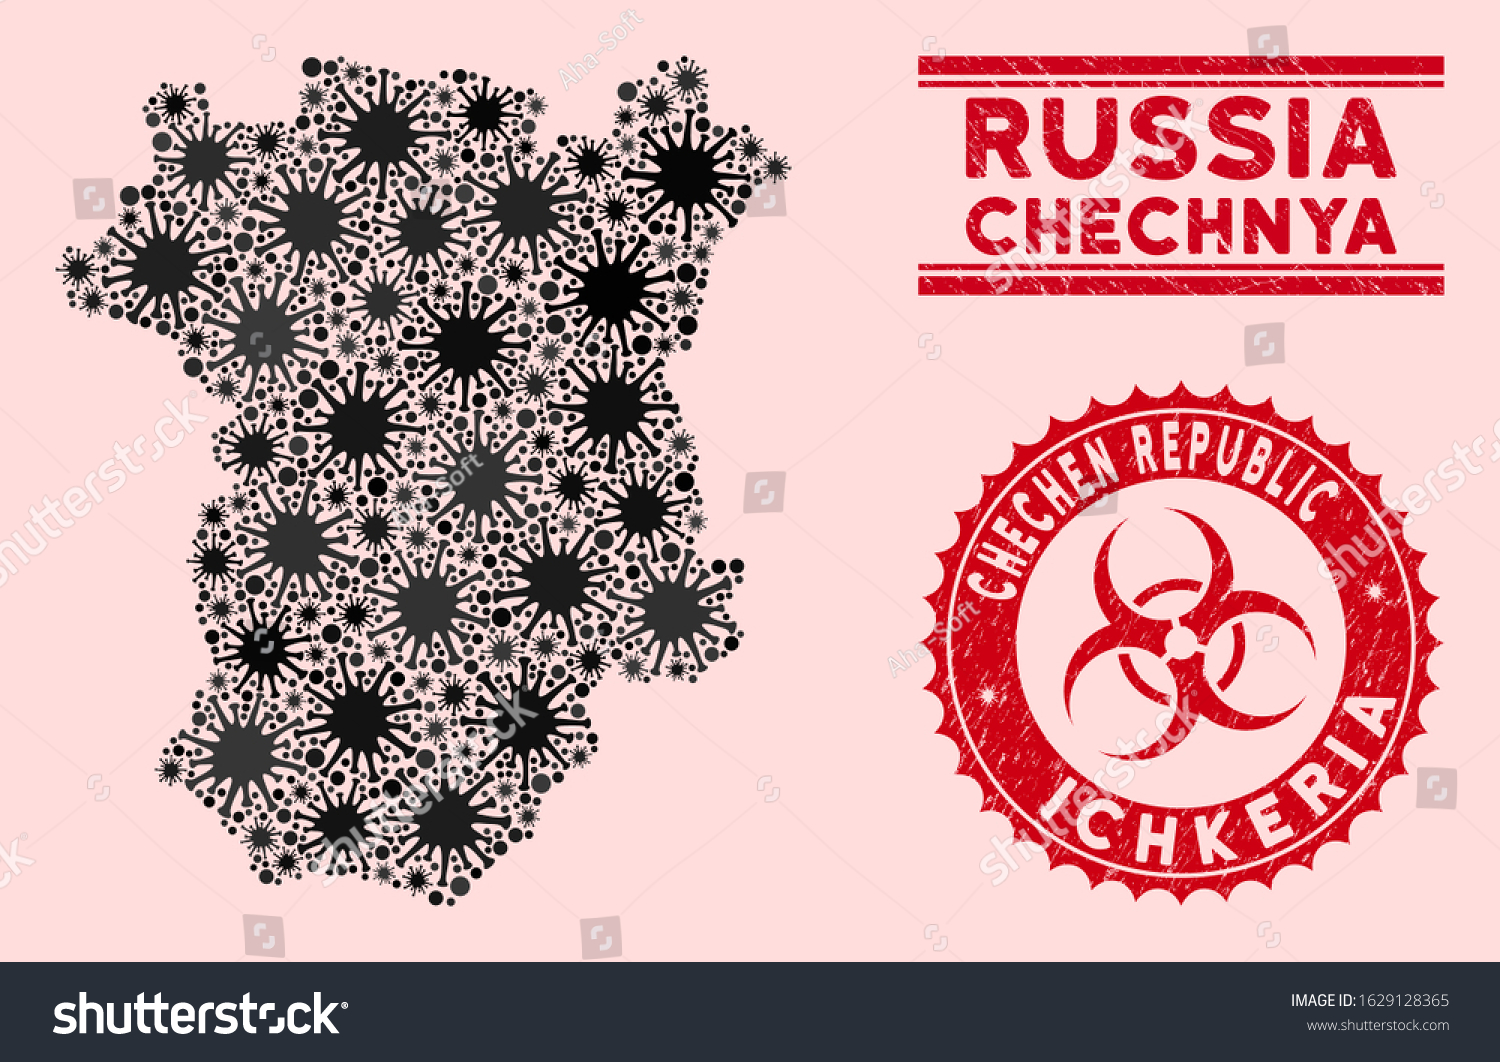 Coronavirus mosaic Chechnya map and red distressed stamp seals with biohazard sign. Chechnya map collage constructed with scattered bacillus icons. Red rounded outbreak danger watermark, #1629128365